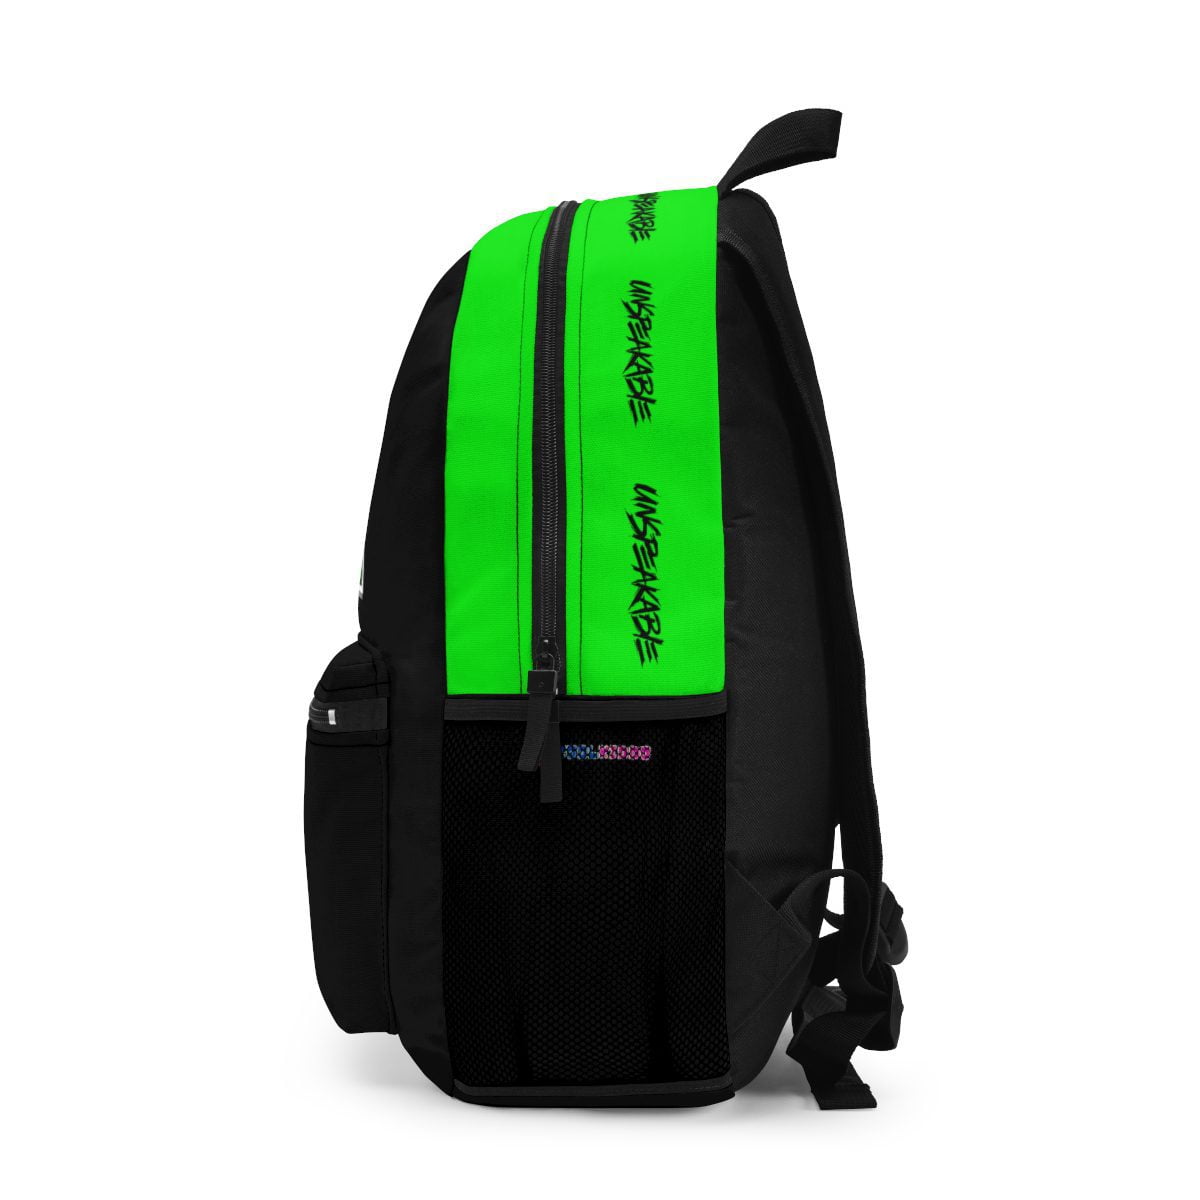 Unspeakable Gaming YouTube Channel Backpack in Black and Neon Green Cool Kiddo 14